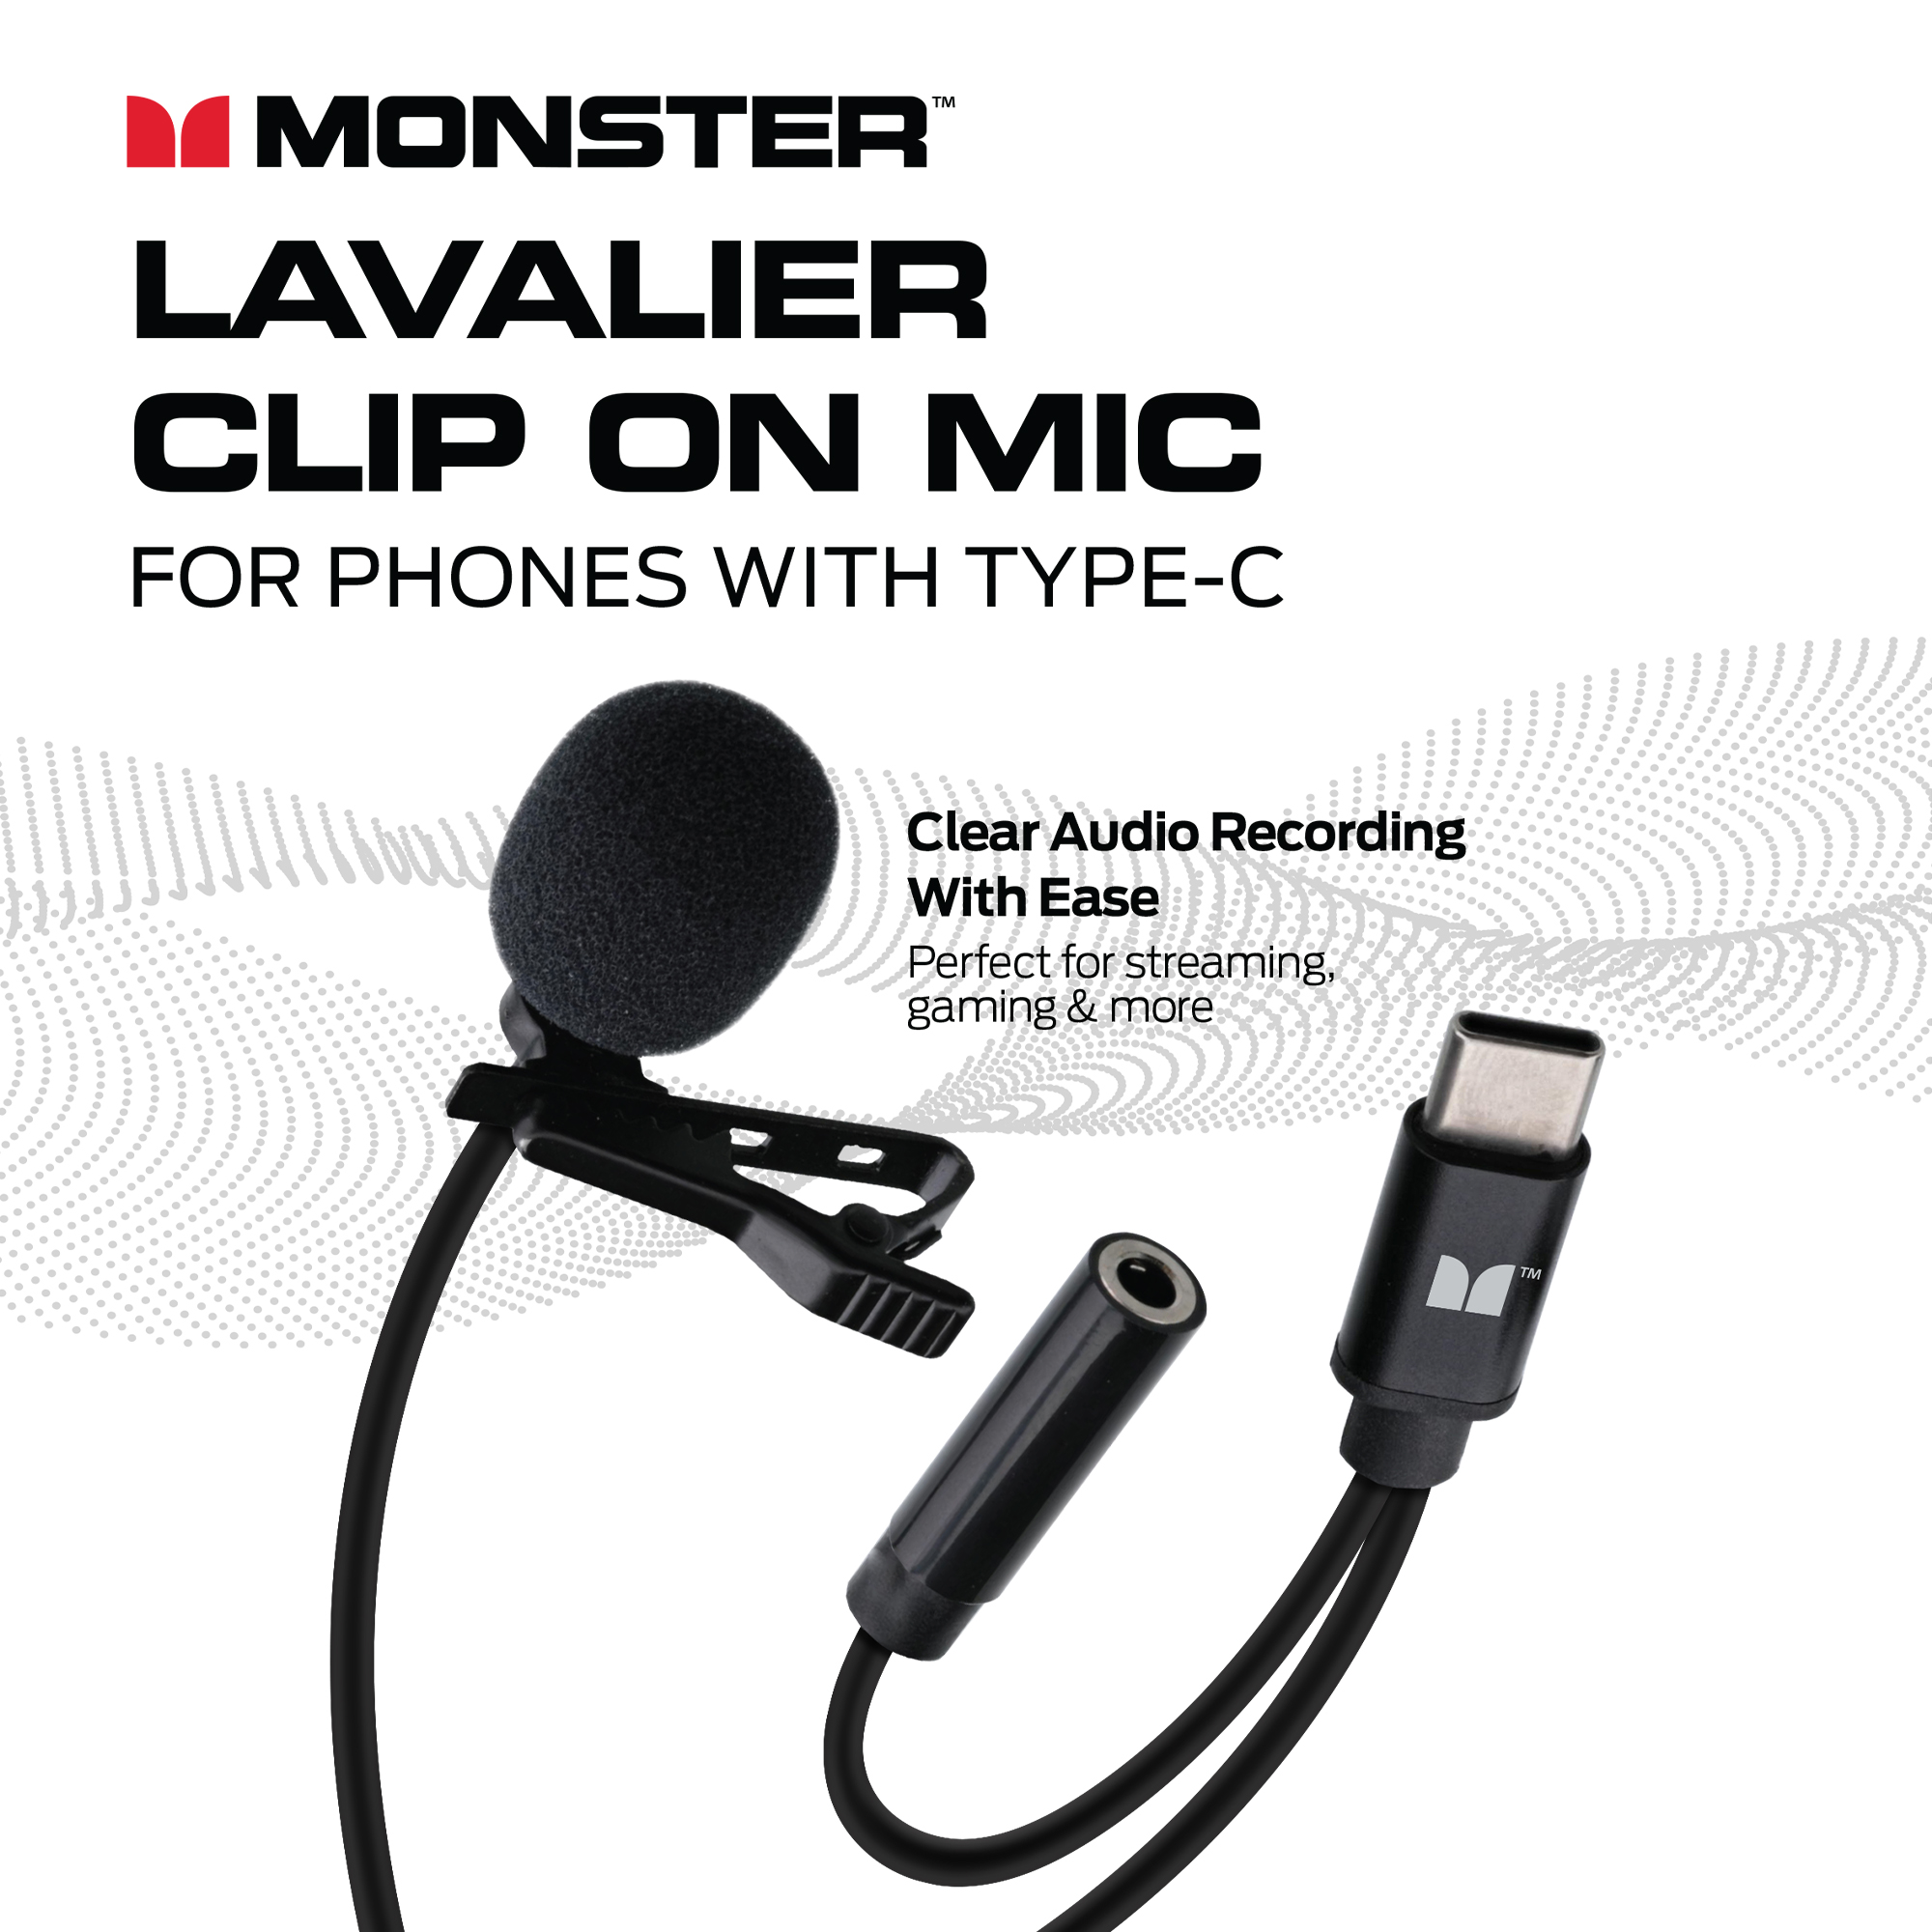 Monster Lavalier Clip-on Microphone, Mic For Type-C USB Ports, Universal Device Support - image 3 of 5